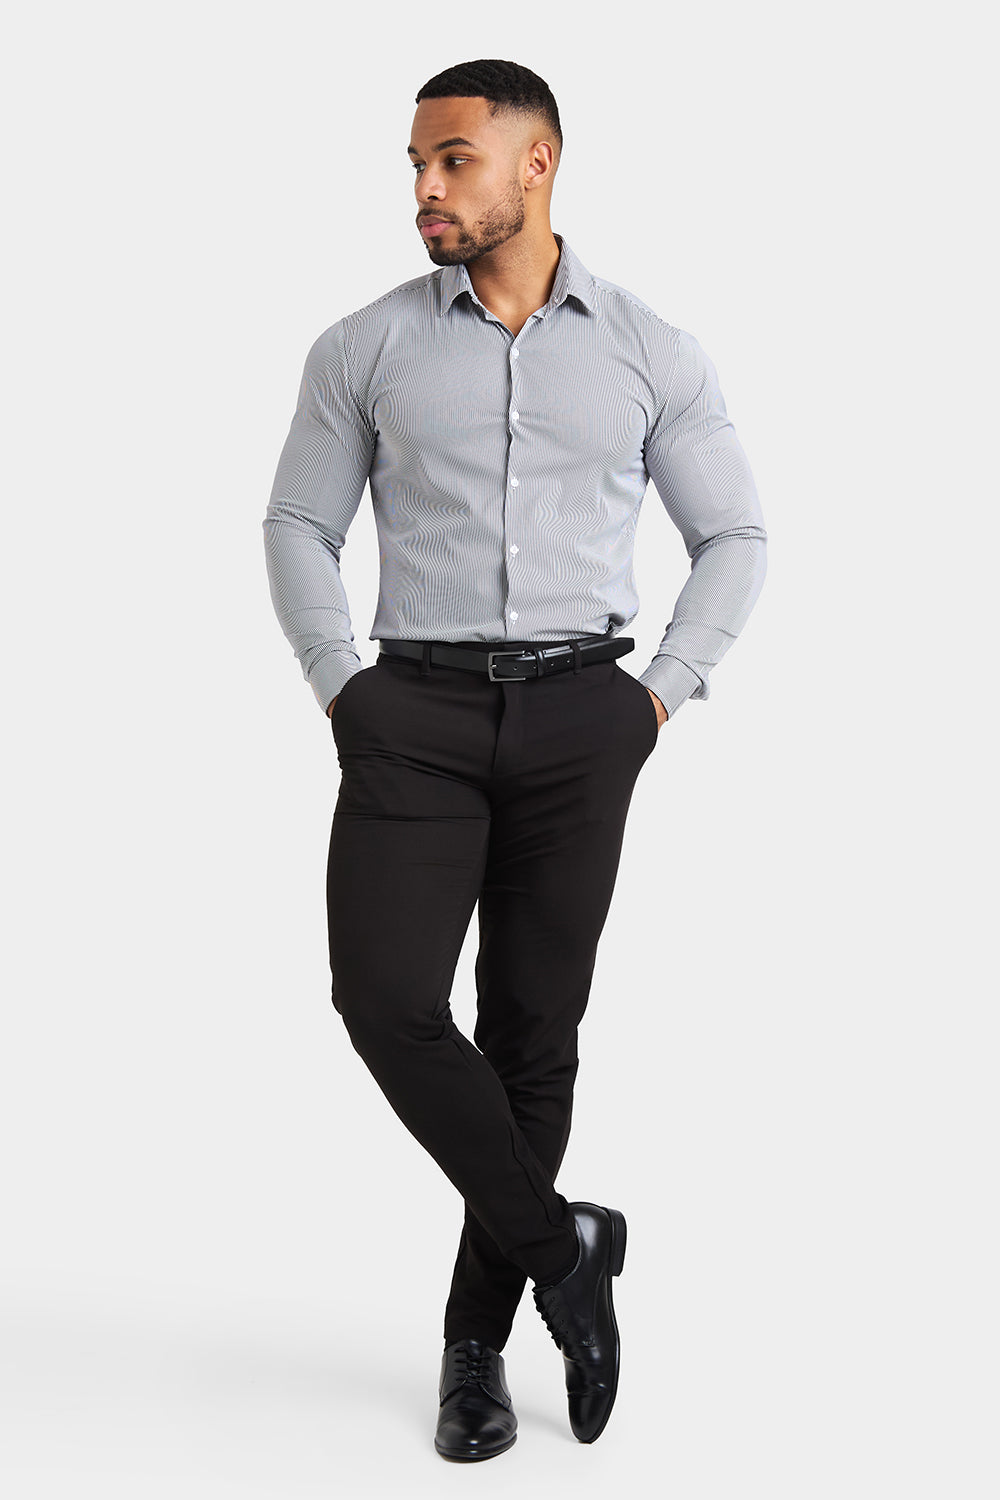 Performance Business Shirt in Navy Fine Stripe - TAILORED ATHLETE - ROW